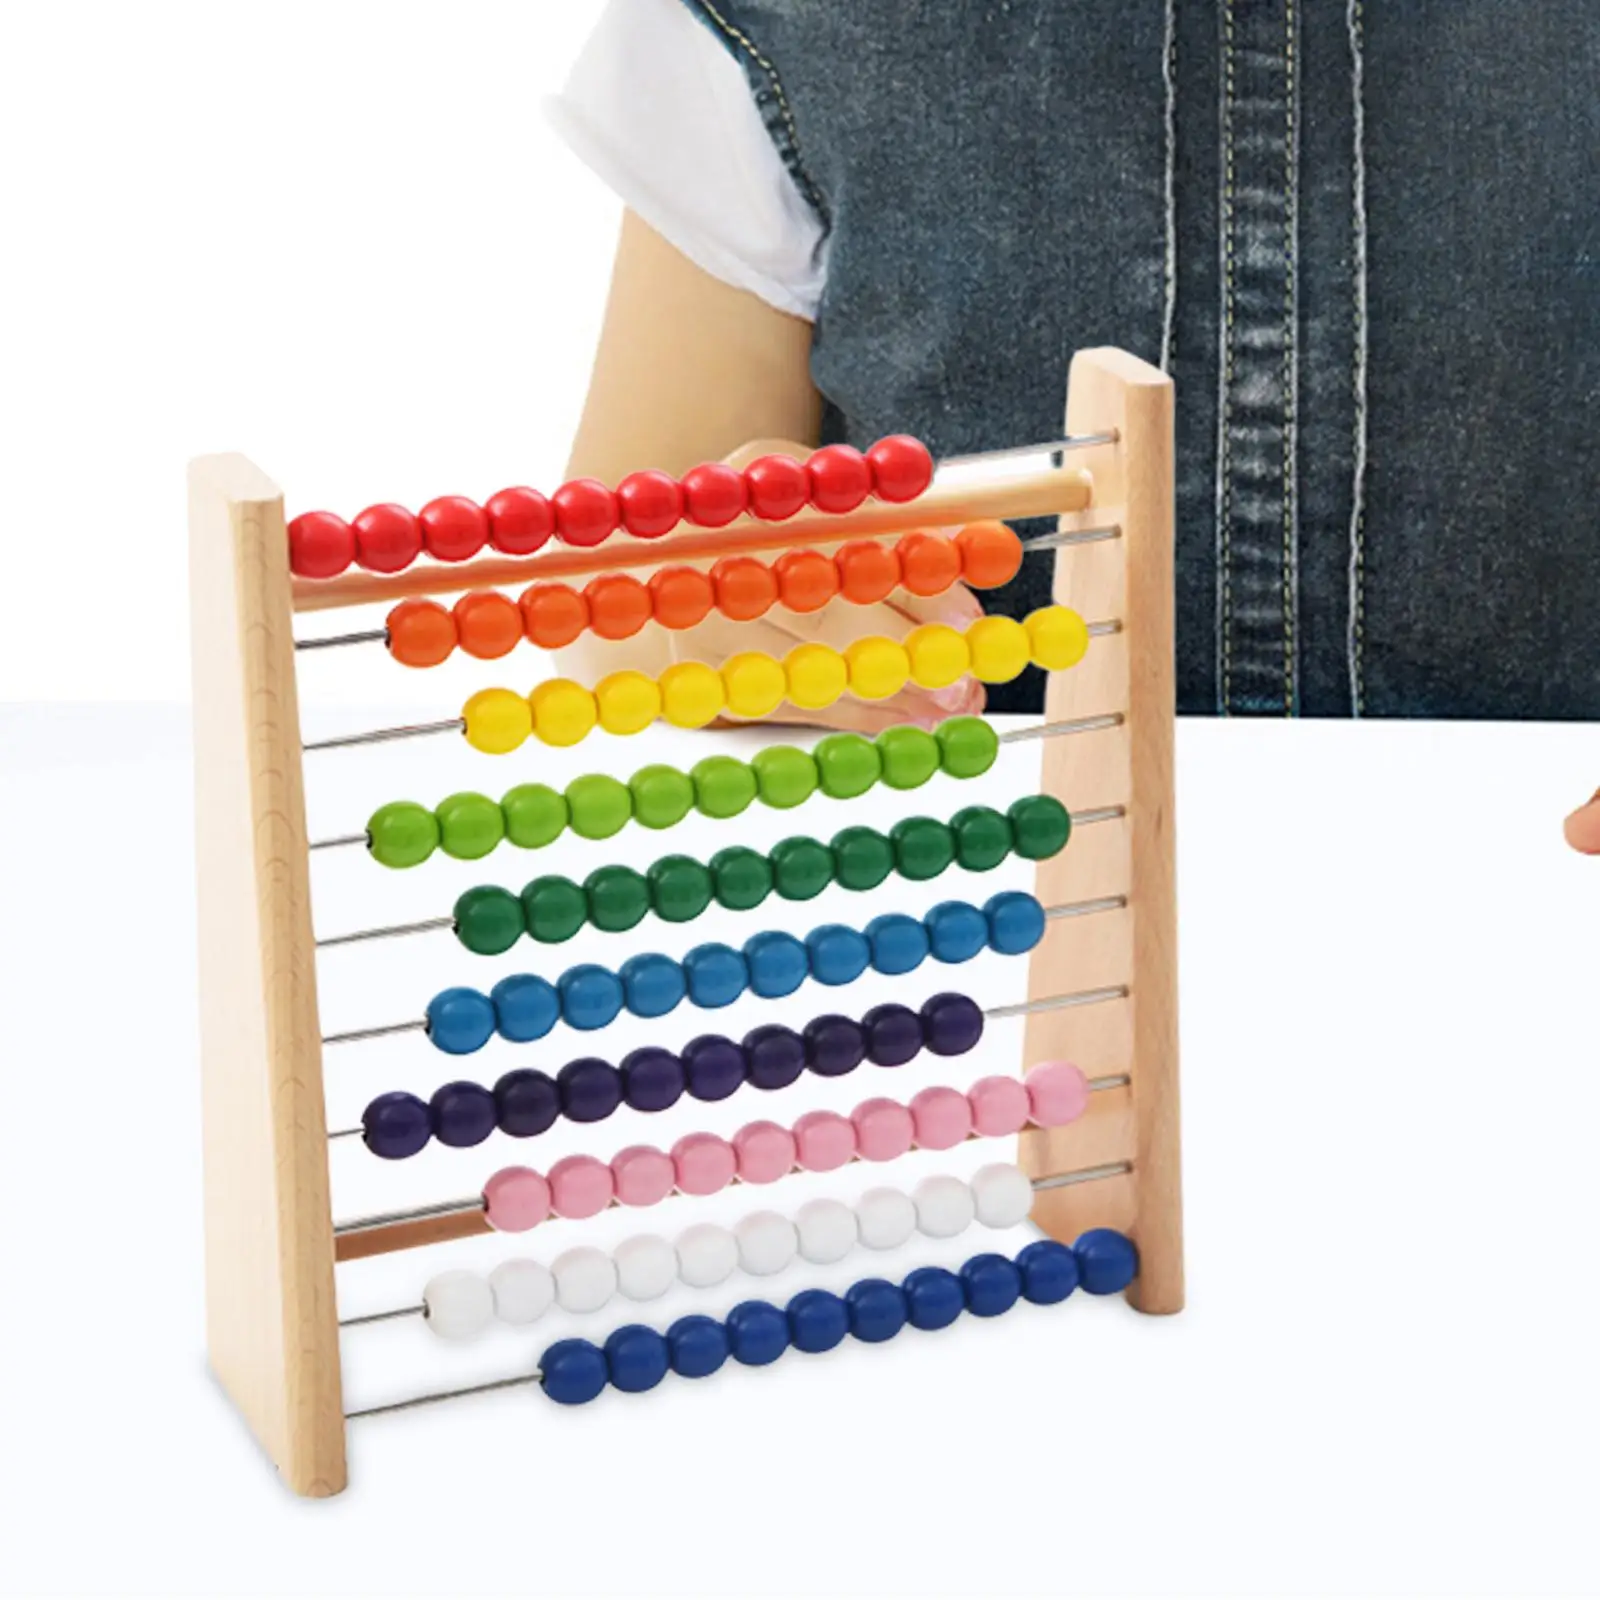 Children Rainbow Counting Beads Counting Learning Toy Addition Subtraction Counting Frames Toy for Kids Children Holiday Gifts